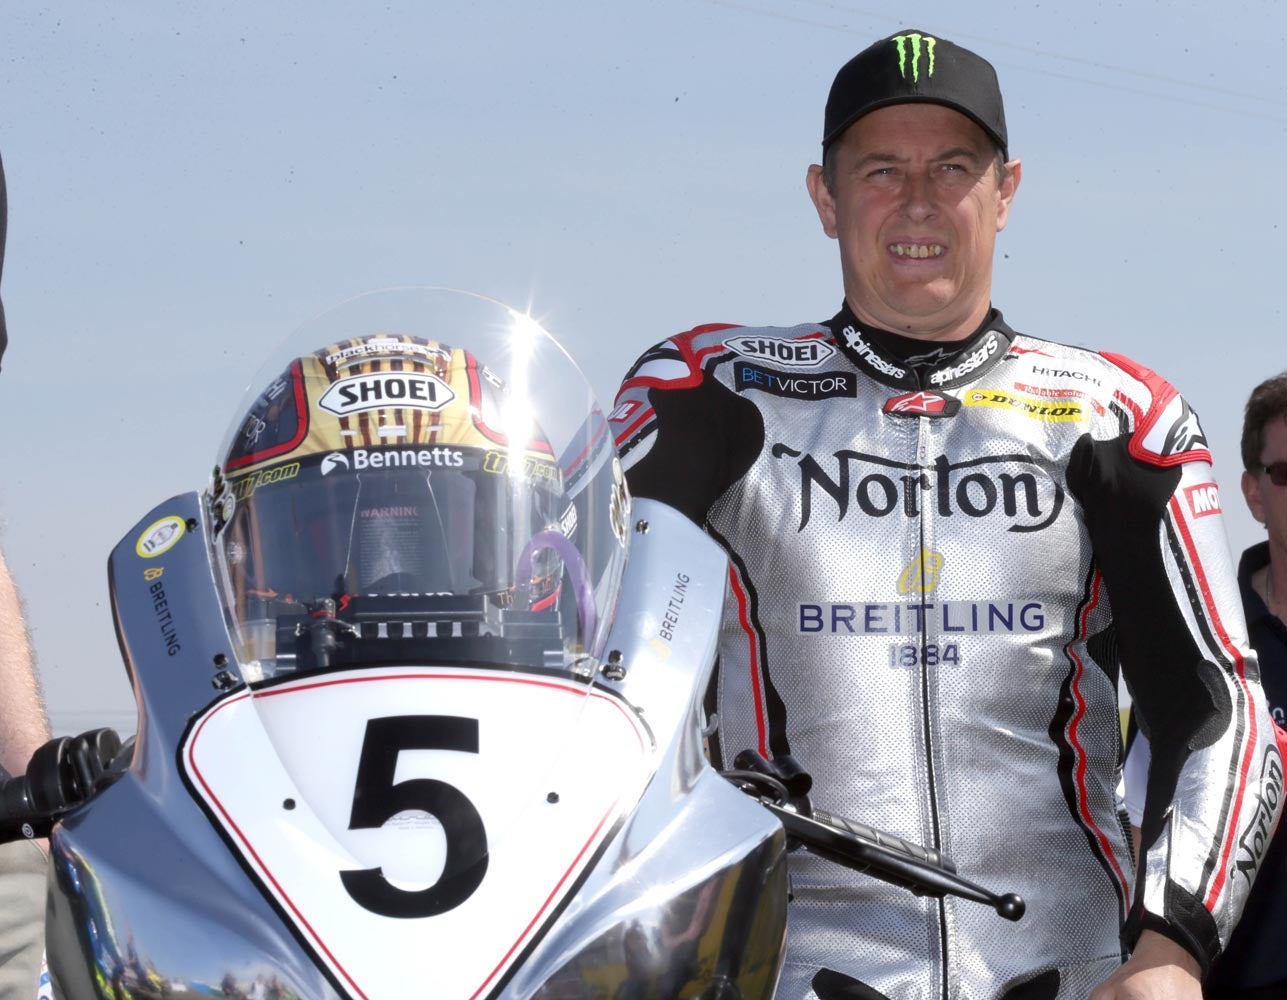 McGuinness returns to the Isle of Man TT with Norton